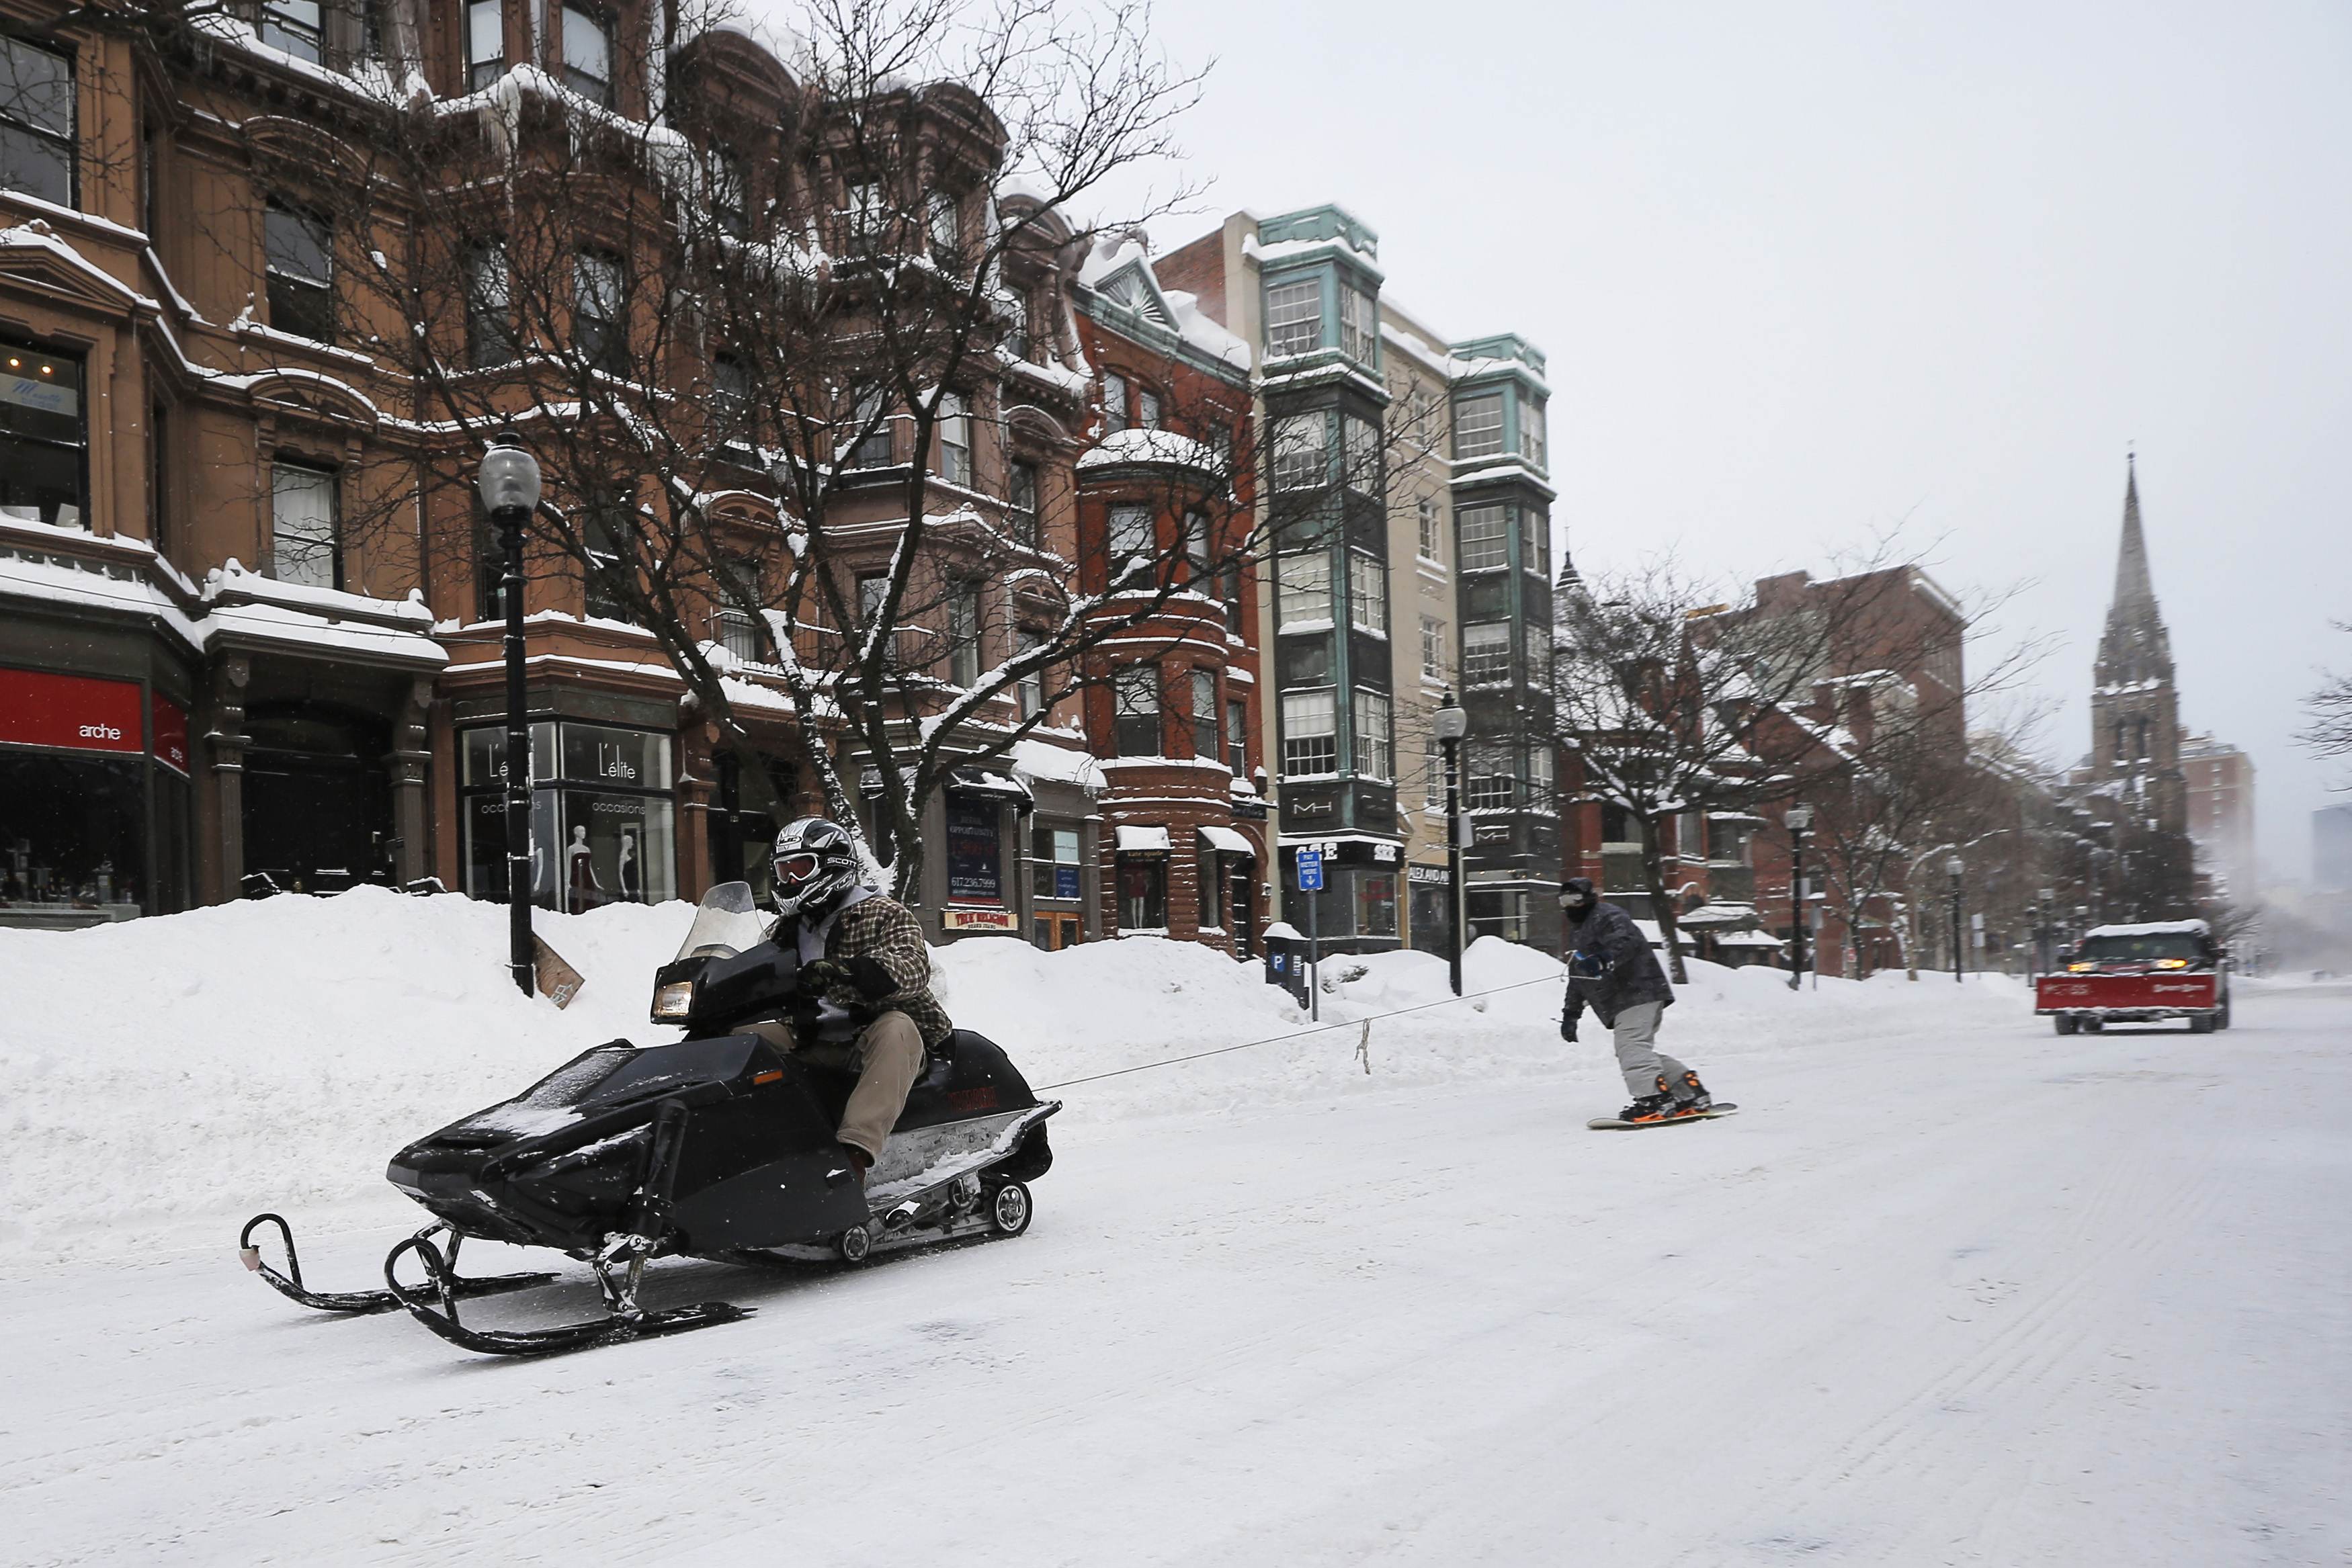 TGIF: The snowboard and snowmobile in the street edition. 